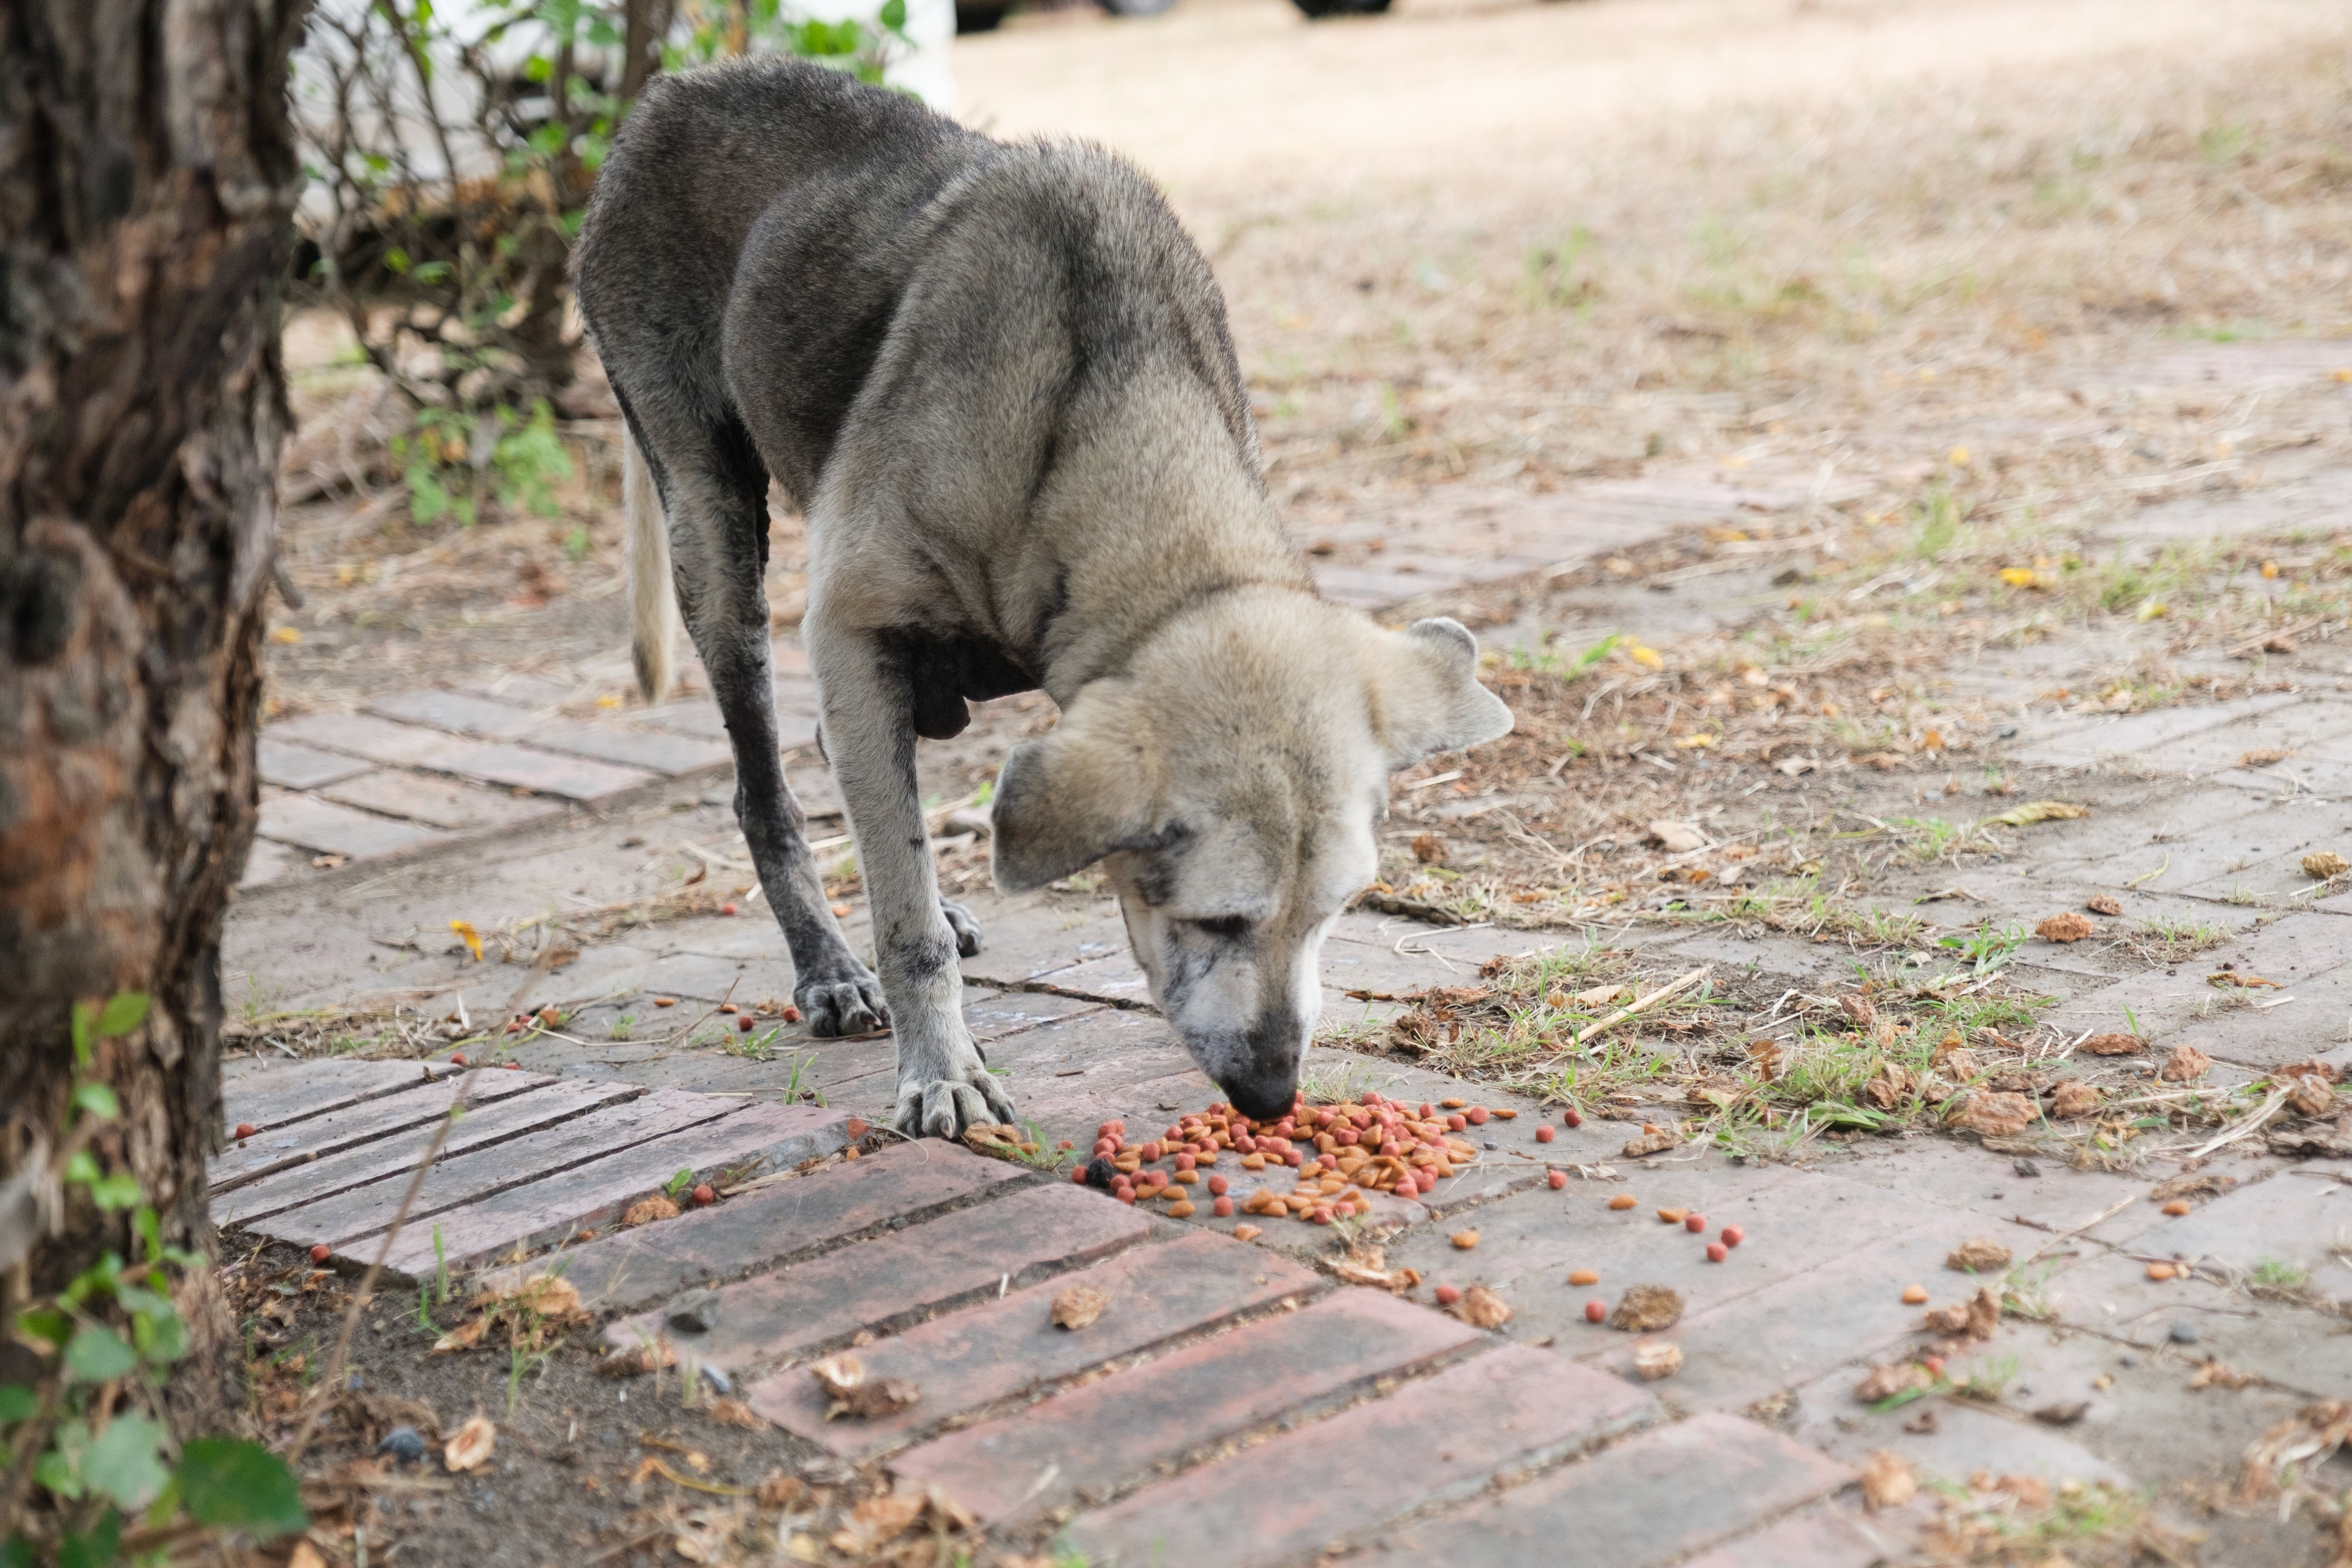 Dog eating kibble off a brick path beside a tree